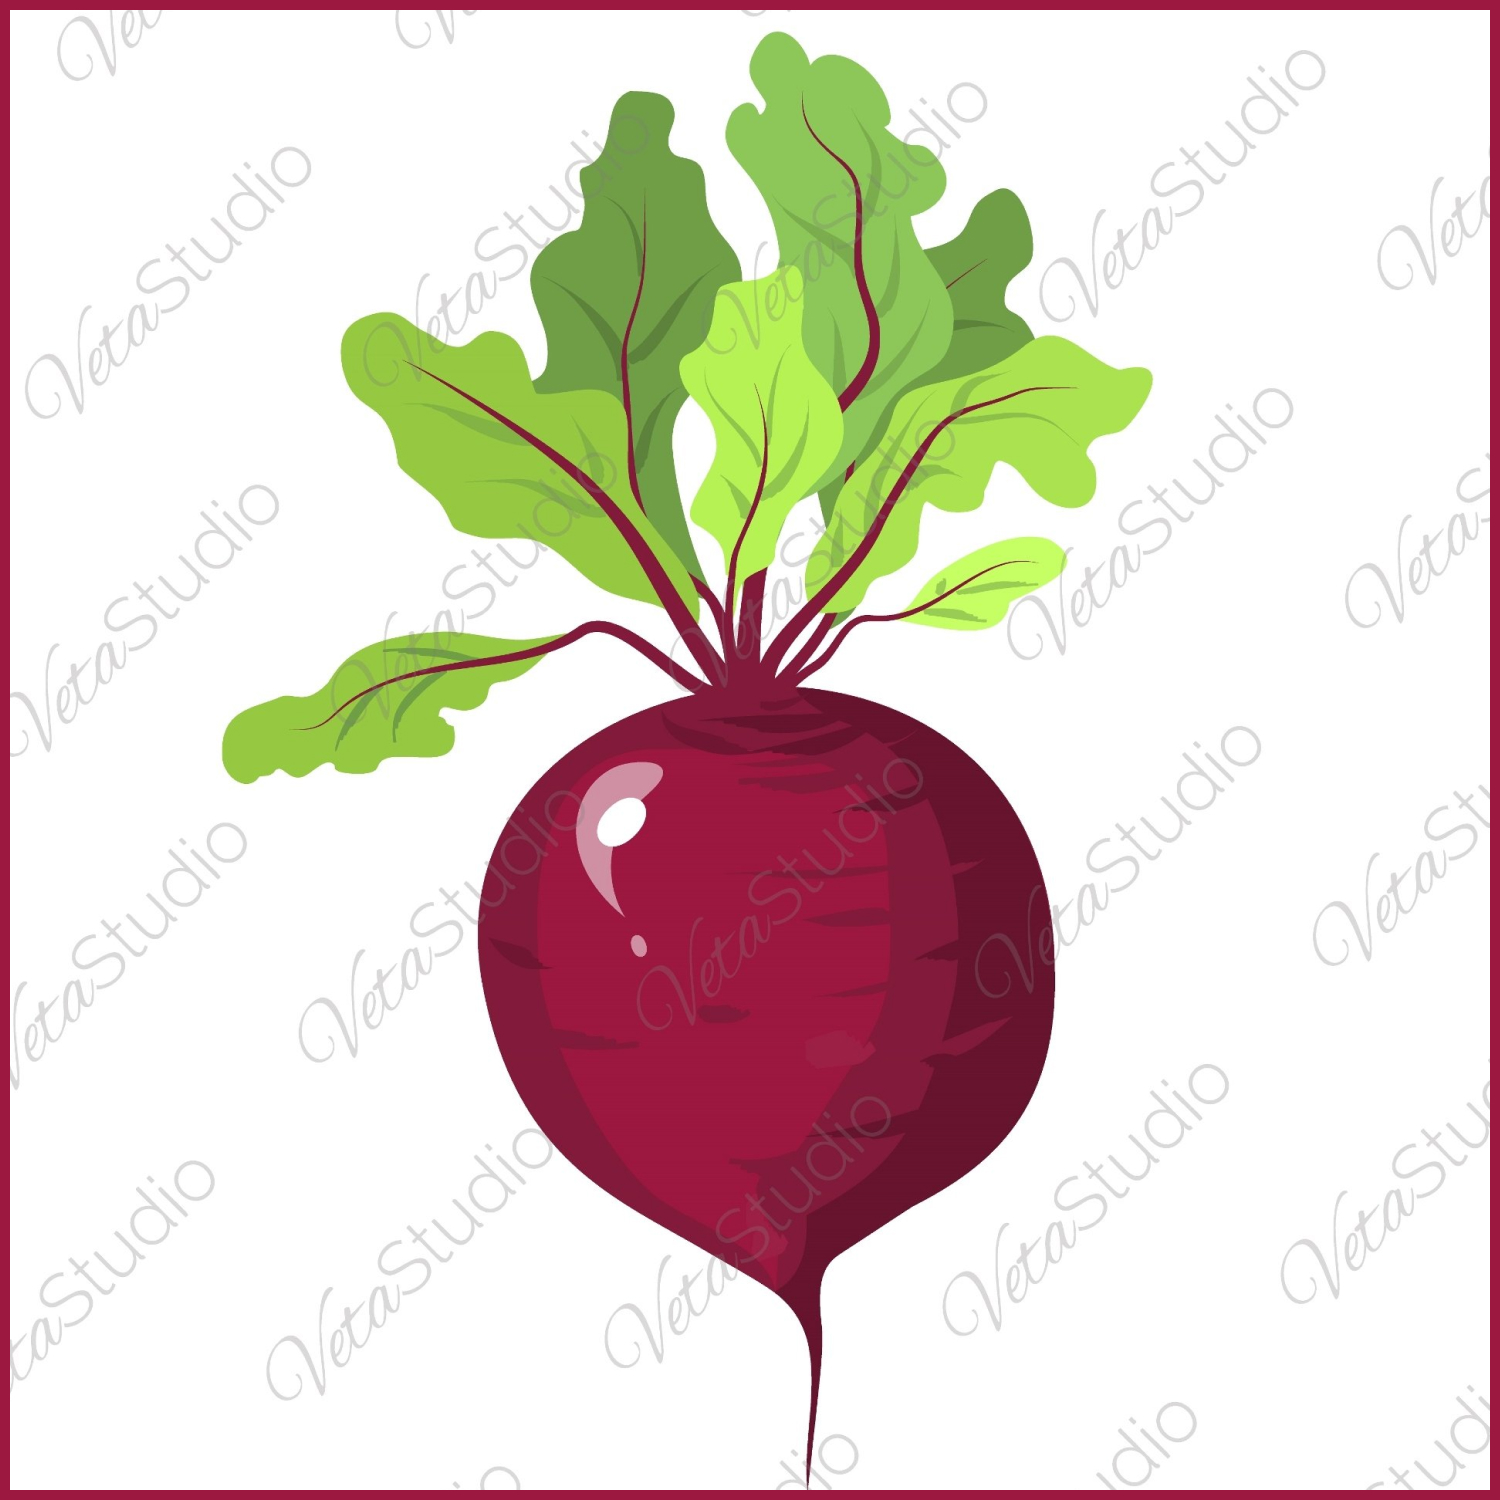 Beet image with green leaves. Red beetroot. SVG. VECTOR. cover.